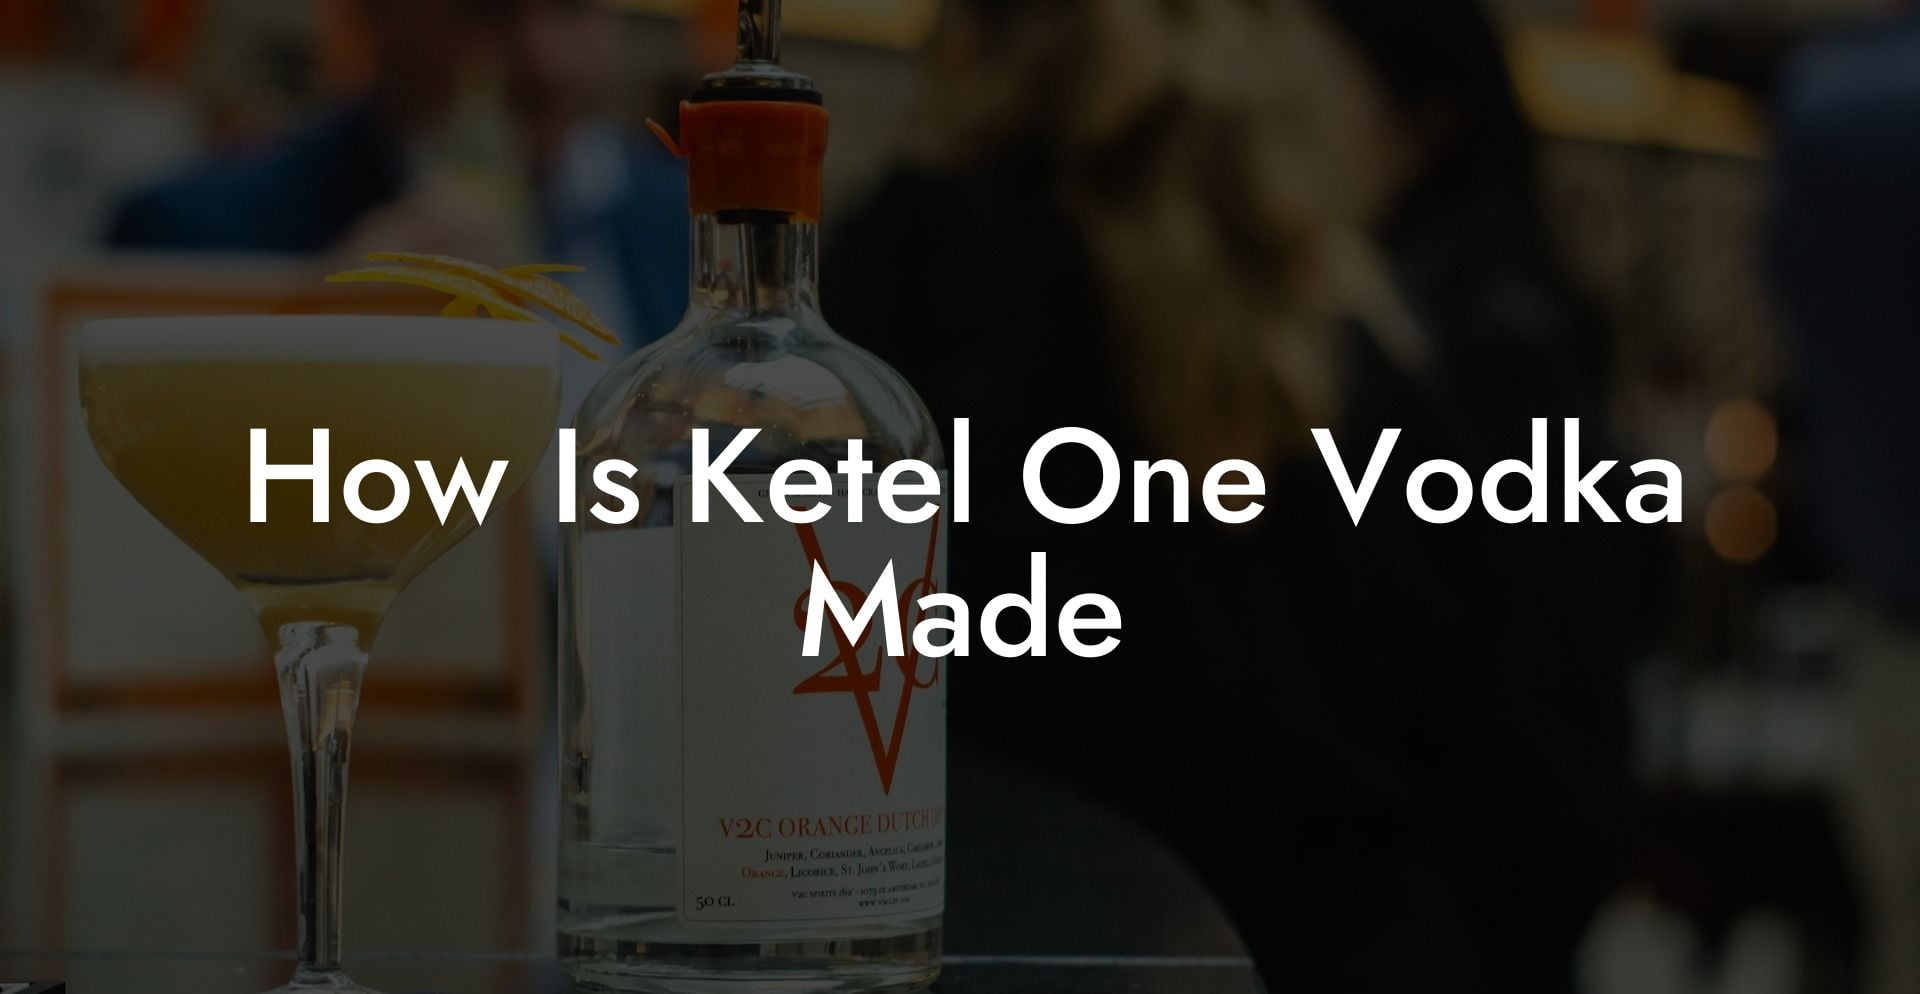 How Is Ketel One Vodka Made